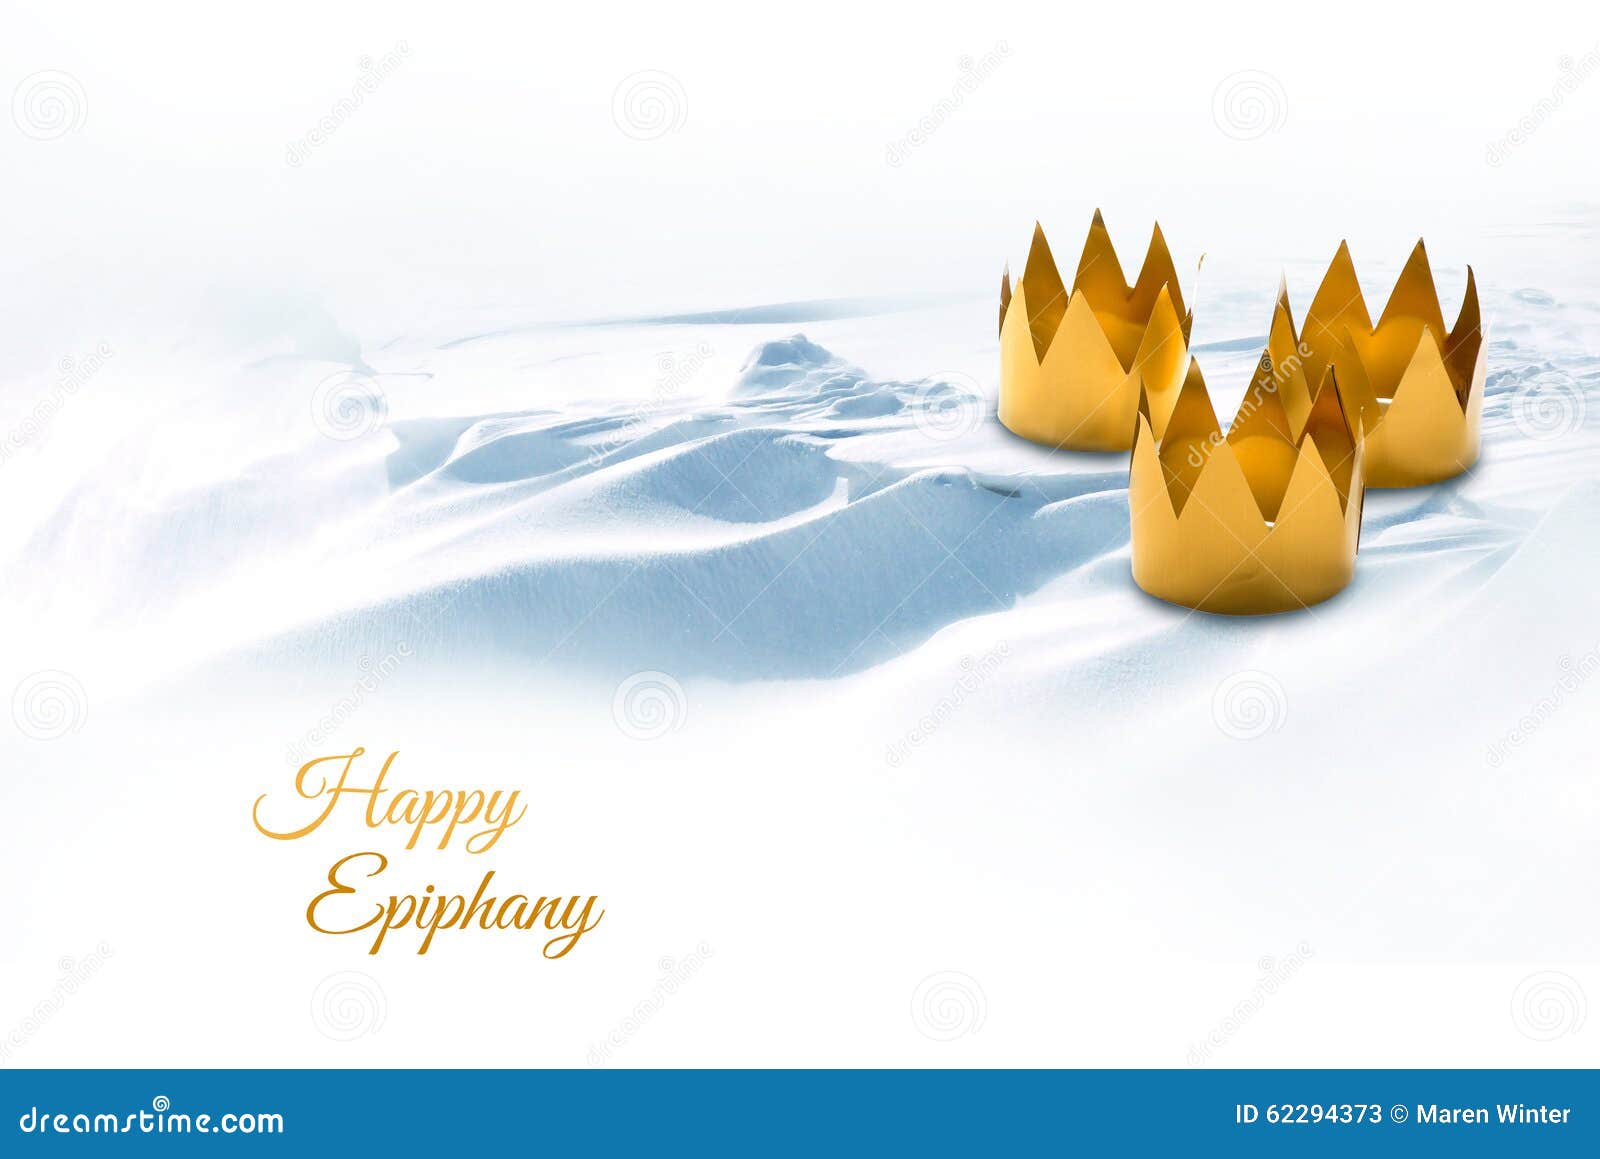 epiphany, three kings day, ized by three tinkered crowns o